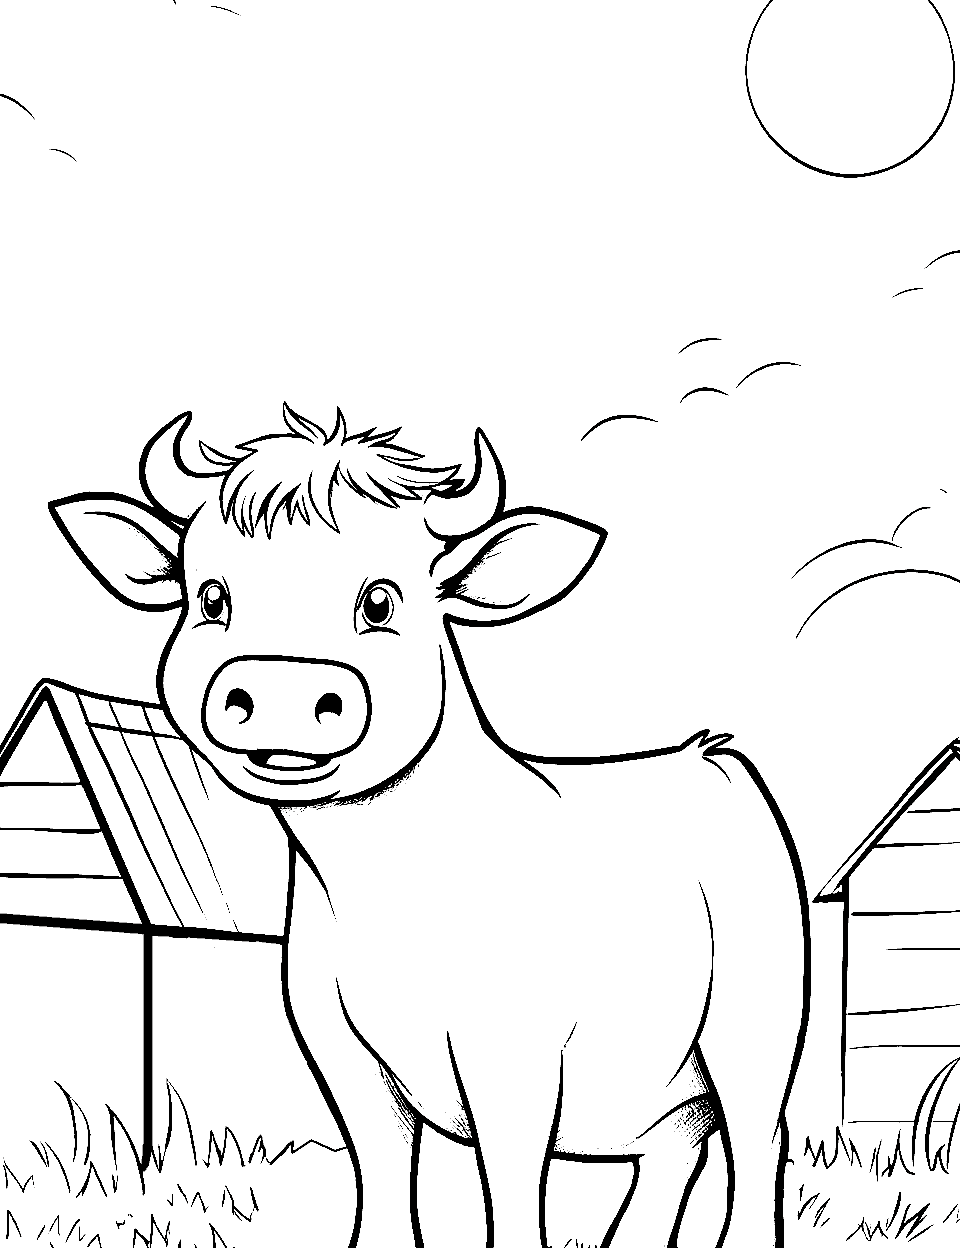 Sunny Day and a Cow Coloring Page - A cow leisurely standing in front of a barn on a sunny day.